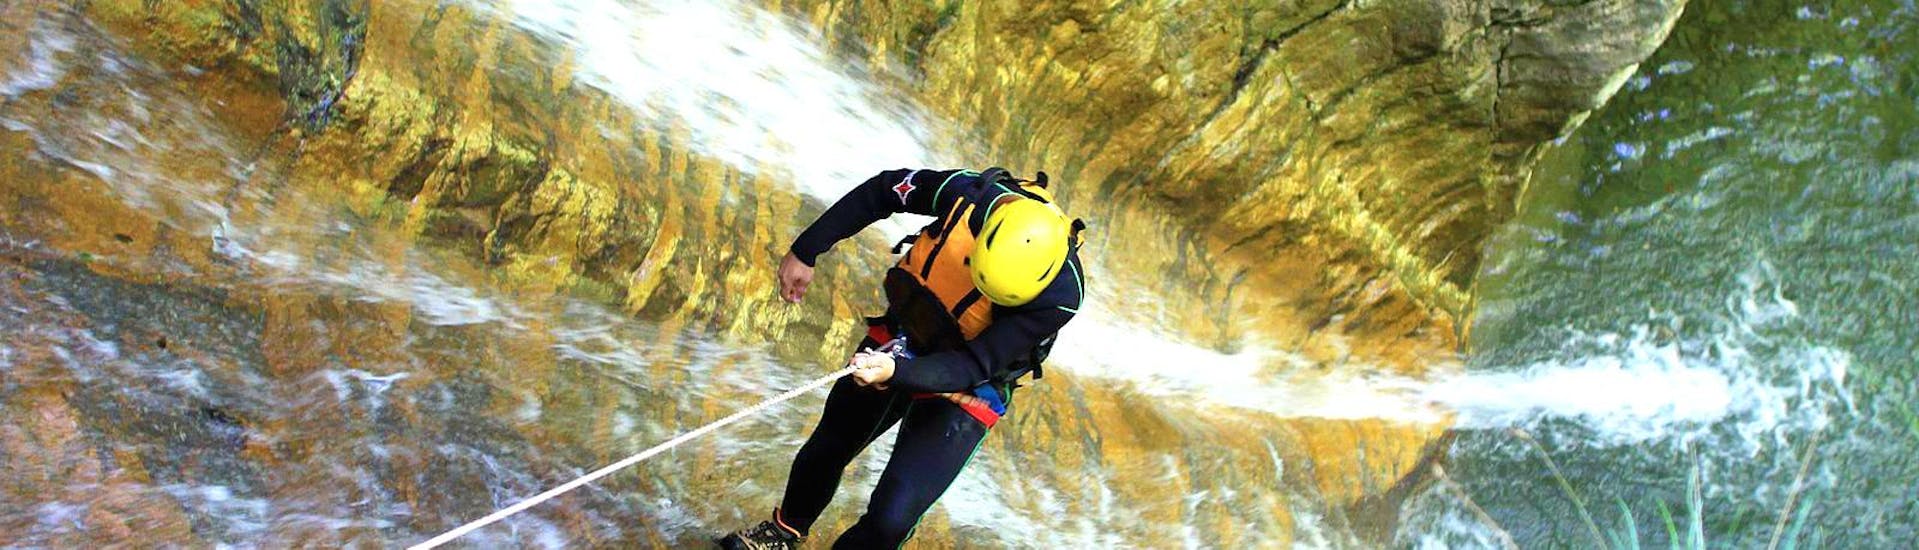 Canyoning sportif à Lenggries - Sylvensteinsee avec Montevia Lenggries.